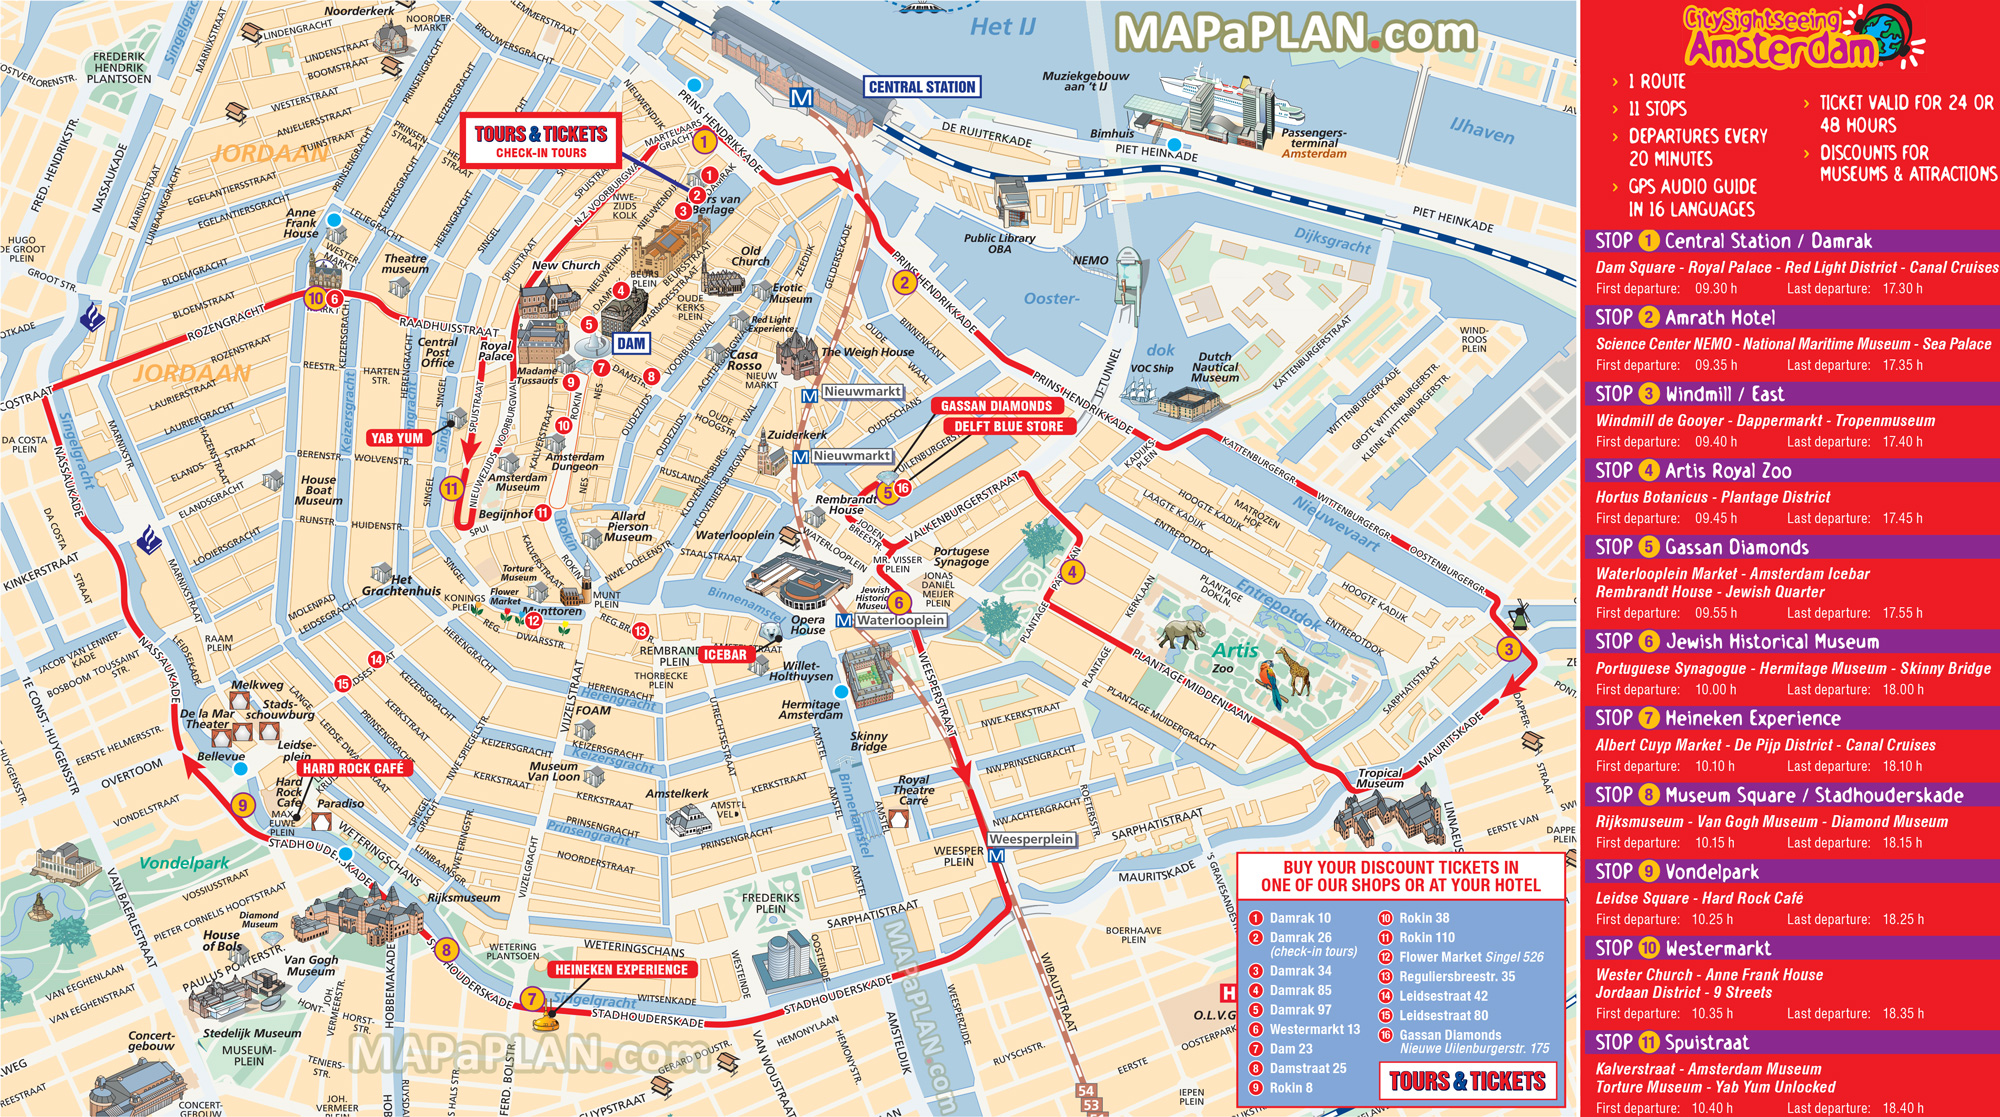 City Sightseeing hop on hop off double decker open top bus tour routes Amsterdam top tourist attractions map